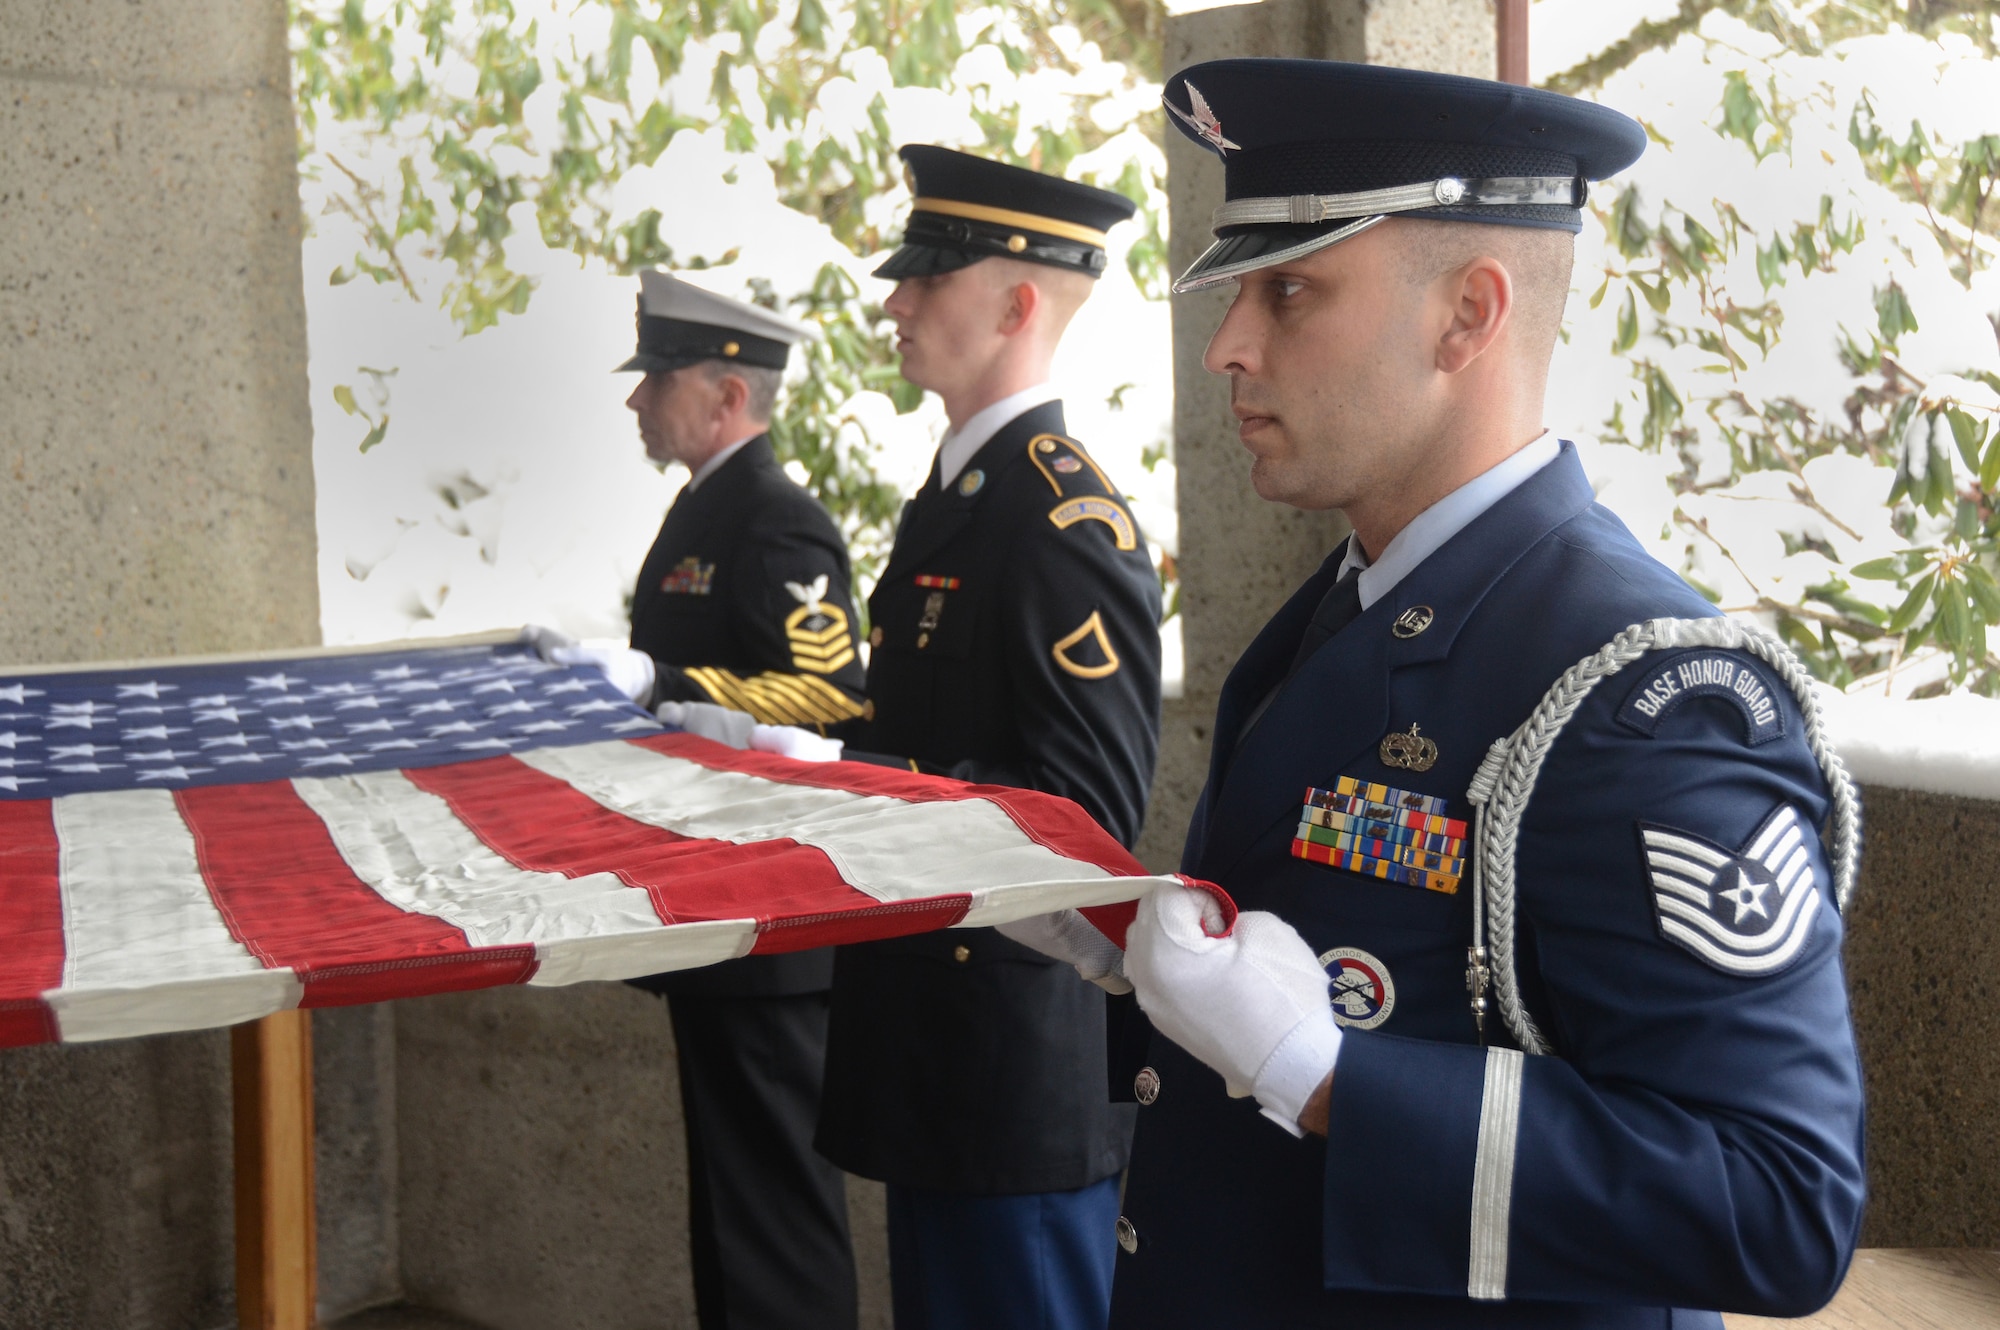 Oregon Air National Guard Tech. Sgt. Justin Meininger, right, along with Army National Guard Private First Class Chris Bourgo, center, and U.S. Navy Electronics Technician Chief Petty Office Jim Cameron, left, perform military funeral honors during a weekly memorial service at Willamette National Cemetery, Portland, Ore., Jan. 13, 2017. (U.S. Air National Guard photo by Tech. Sgt. John Hughel, 142nd Fighter Wing Public Affairs) 